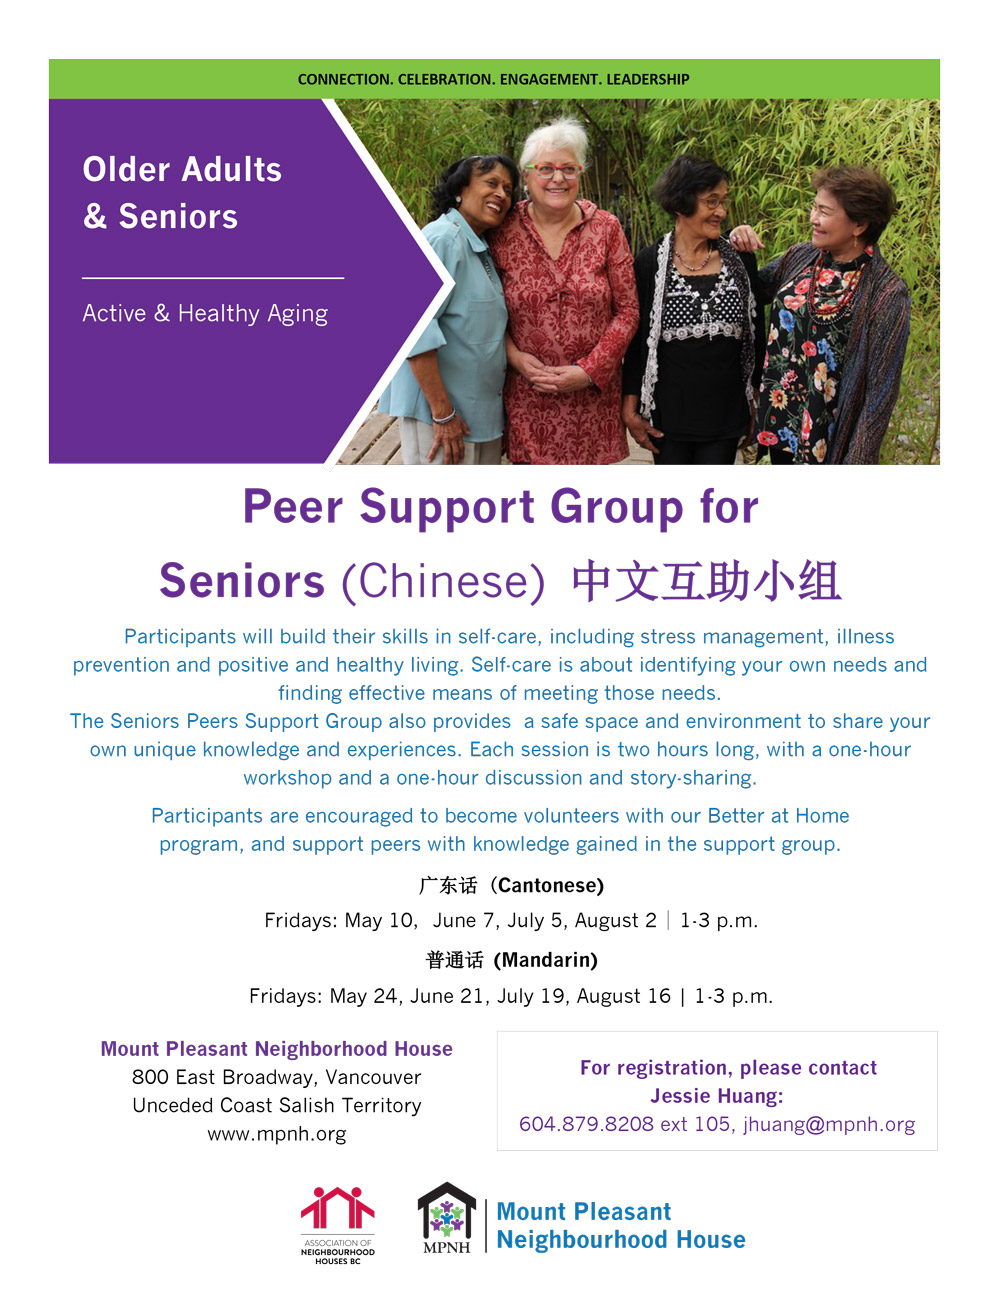 An image of the poster, with program details, and featuring four older adults of different cultural backgrounds socializing with each ohter.